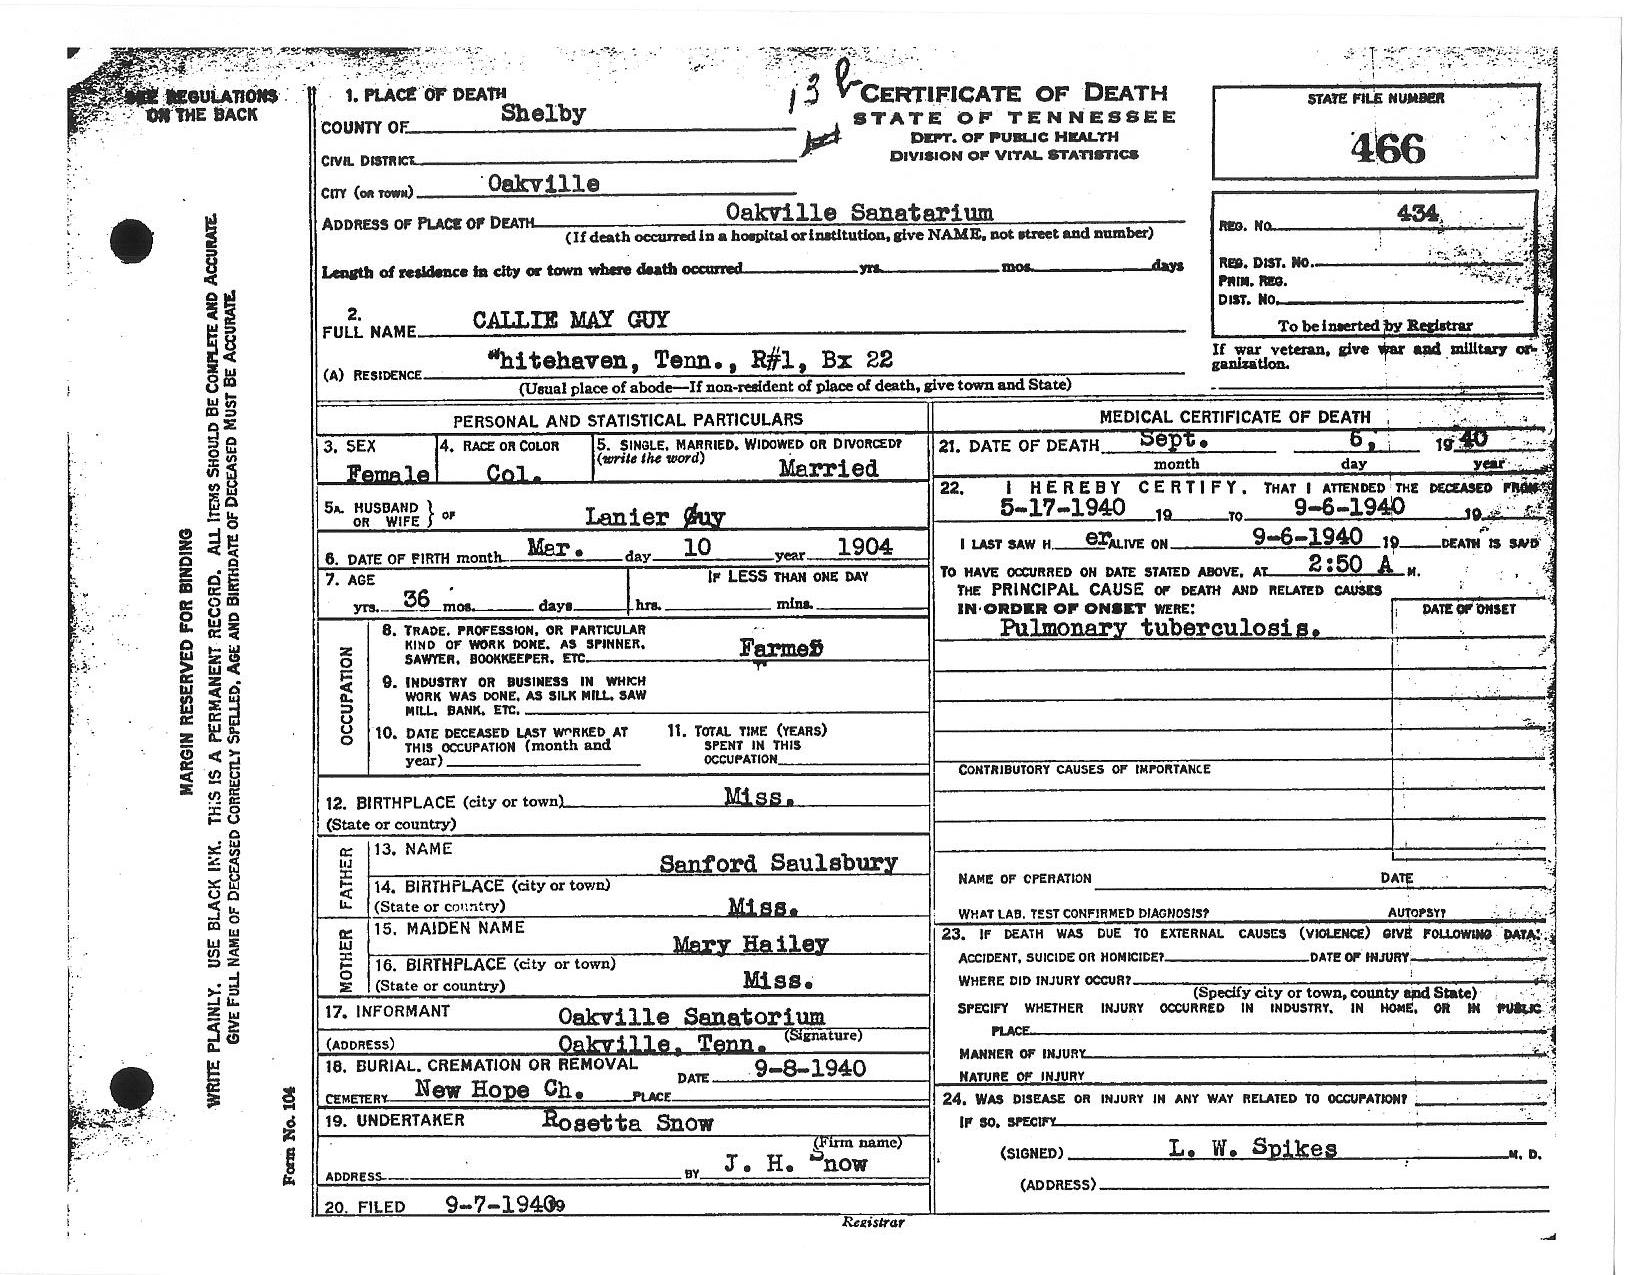 Callie May Saulsberry Guy's Death certificate